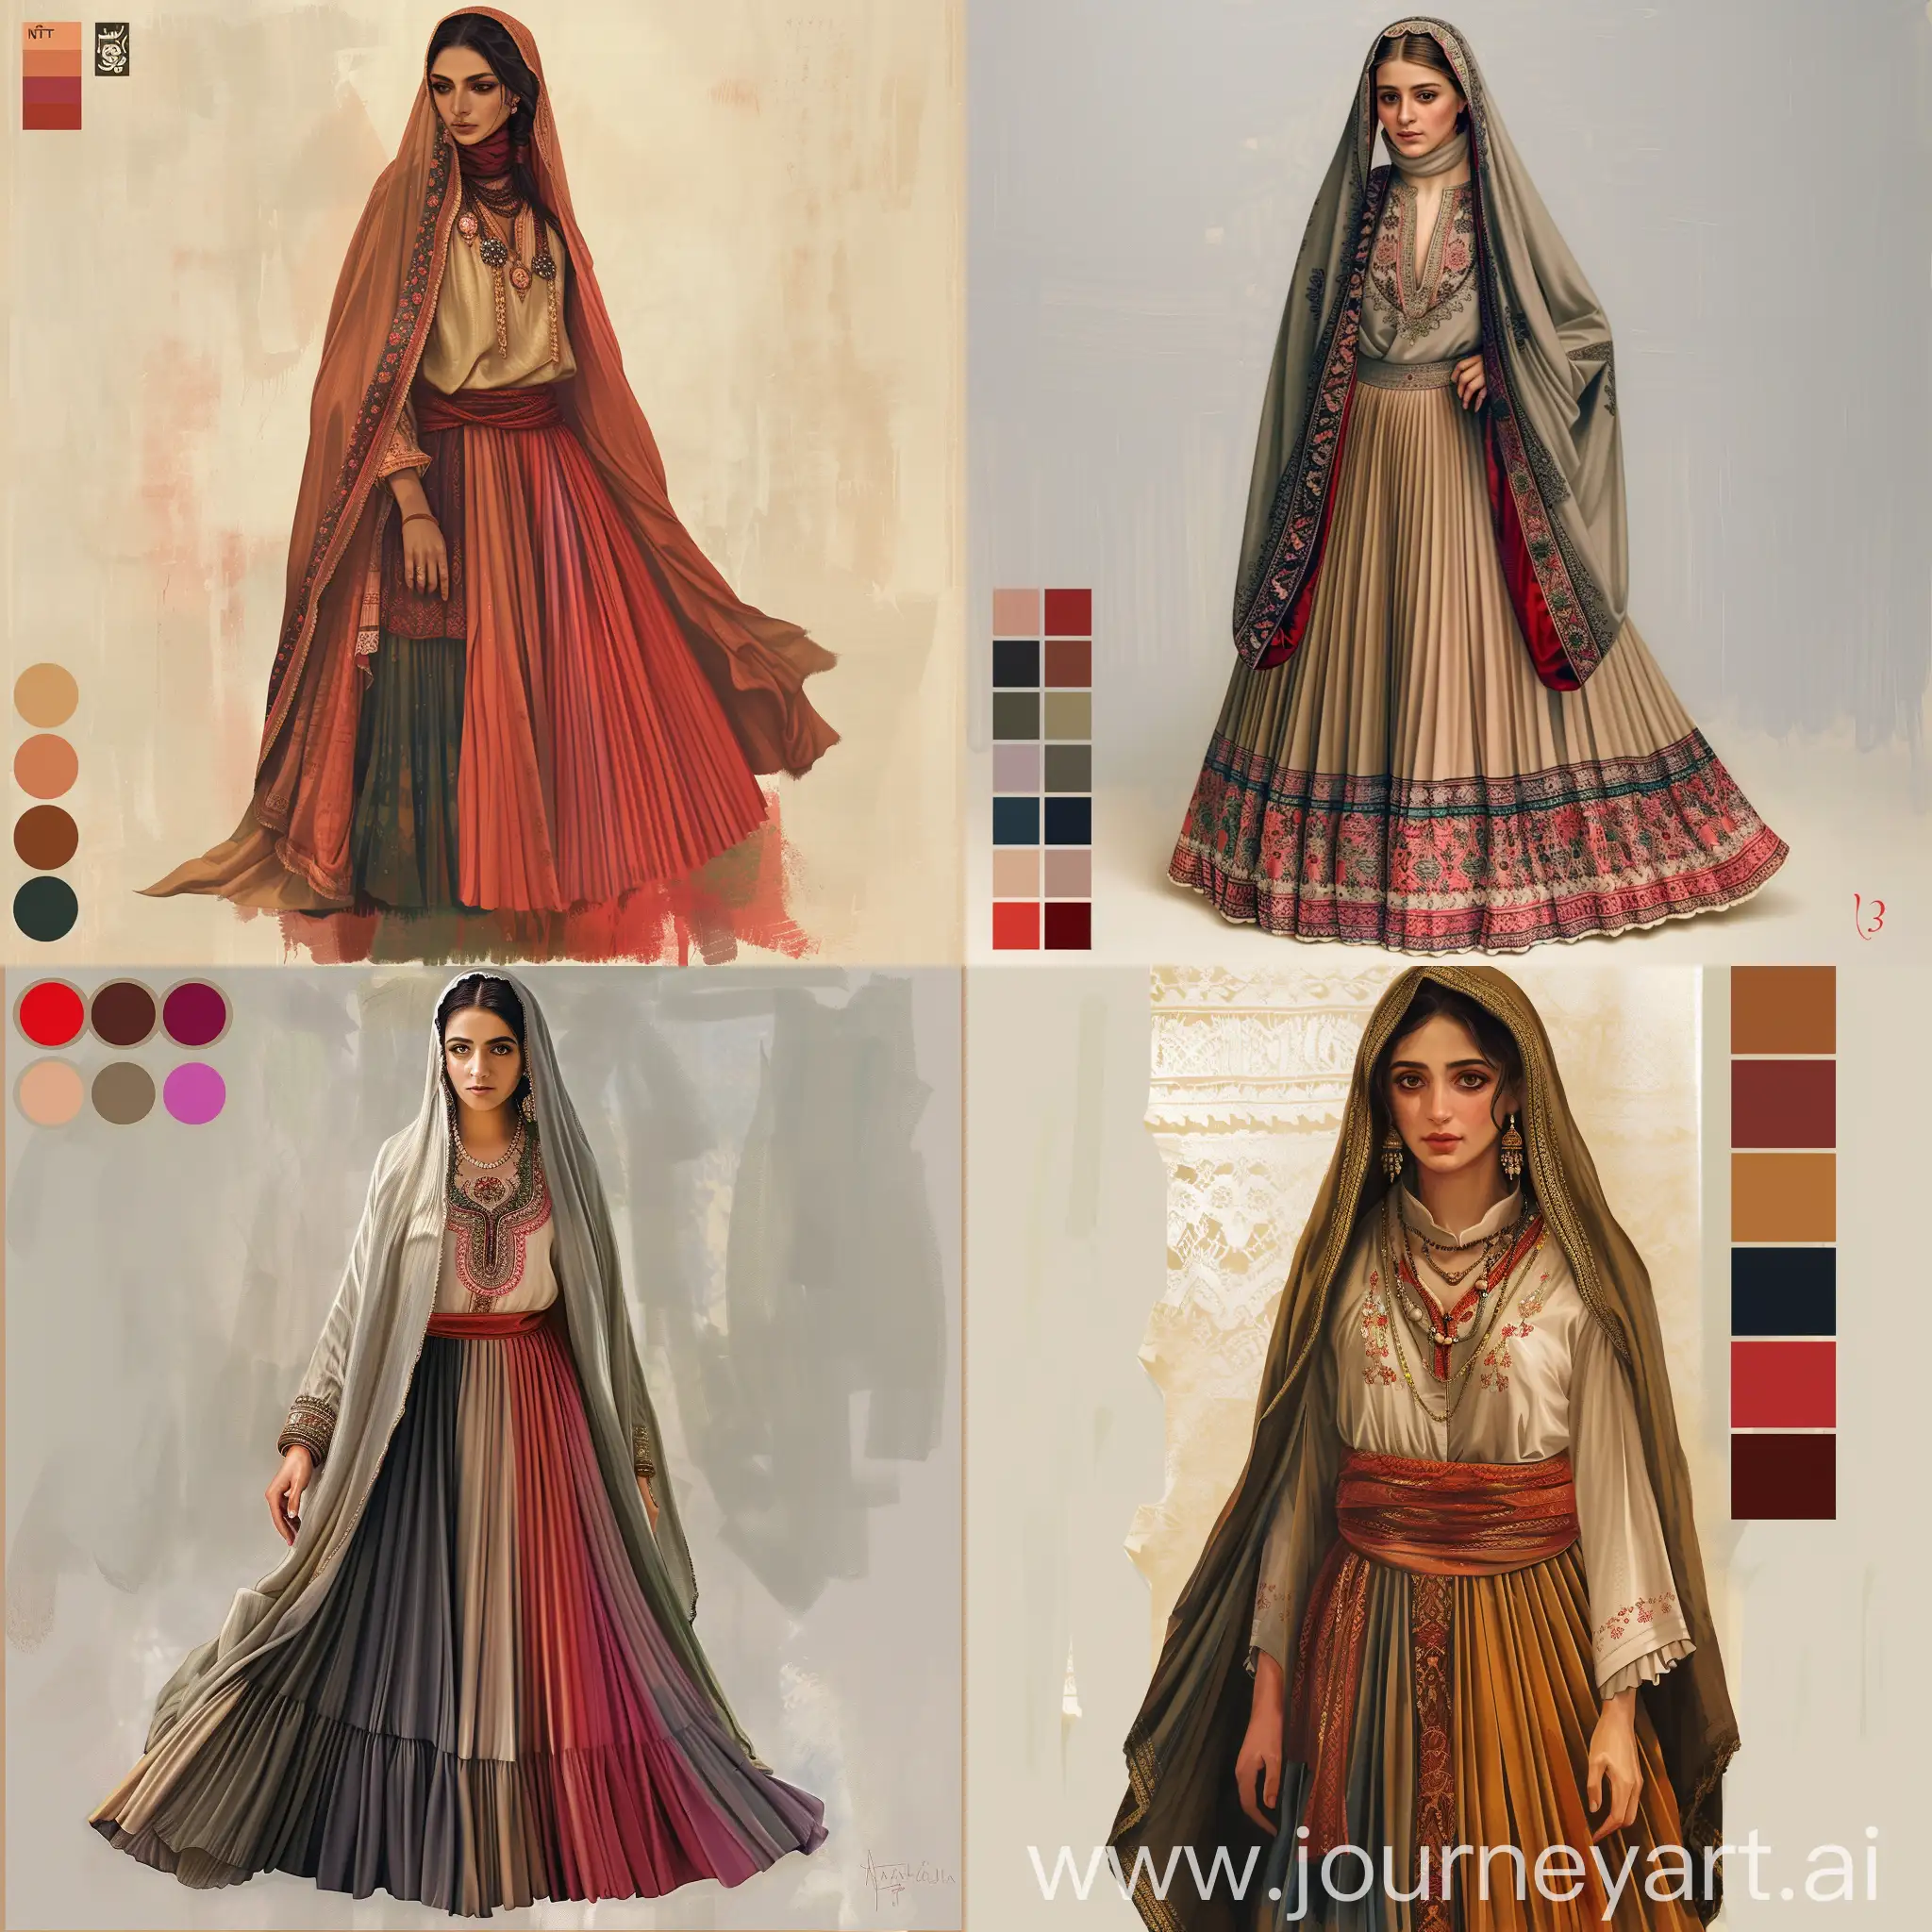   Type of Image: Digital painting, Graphic art  Description of the desired design: The image I have in mind for the NFT is of a woman in a beautiful traditional Bakhtiari outfit, one of the authentic Iranian ethnic garments including a chador, lachak, shirt, and long pleated skirt. This outfit features very beautiful designs and colors. The Bakhtiari chador is made of delicate fabric and adorned. Bakhtiari women's hair is split open on both sides of the face and flows over their shoulders. The lachak and clothing of Bakhtiari women are decorated with needlework and embroidery. These women have adorned their outfits with jewelry to enhance their beauty. The long and pleated skirts of these women are made of high-quality fabric and vibrant, energetic colors.   My sales goal is to target women and enthusiasts of identity, culture, and history. My aim is to showcase the authenticity and beauty of Bakhtiari local attire and the power and beauty of Bakhtiari women.  Color palette for this design:  1. Red: 